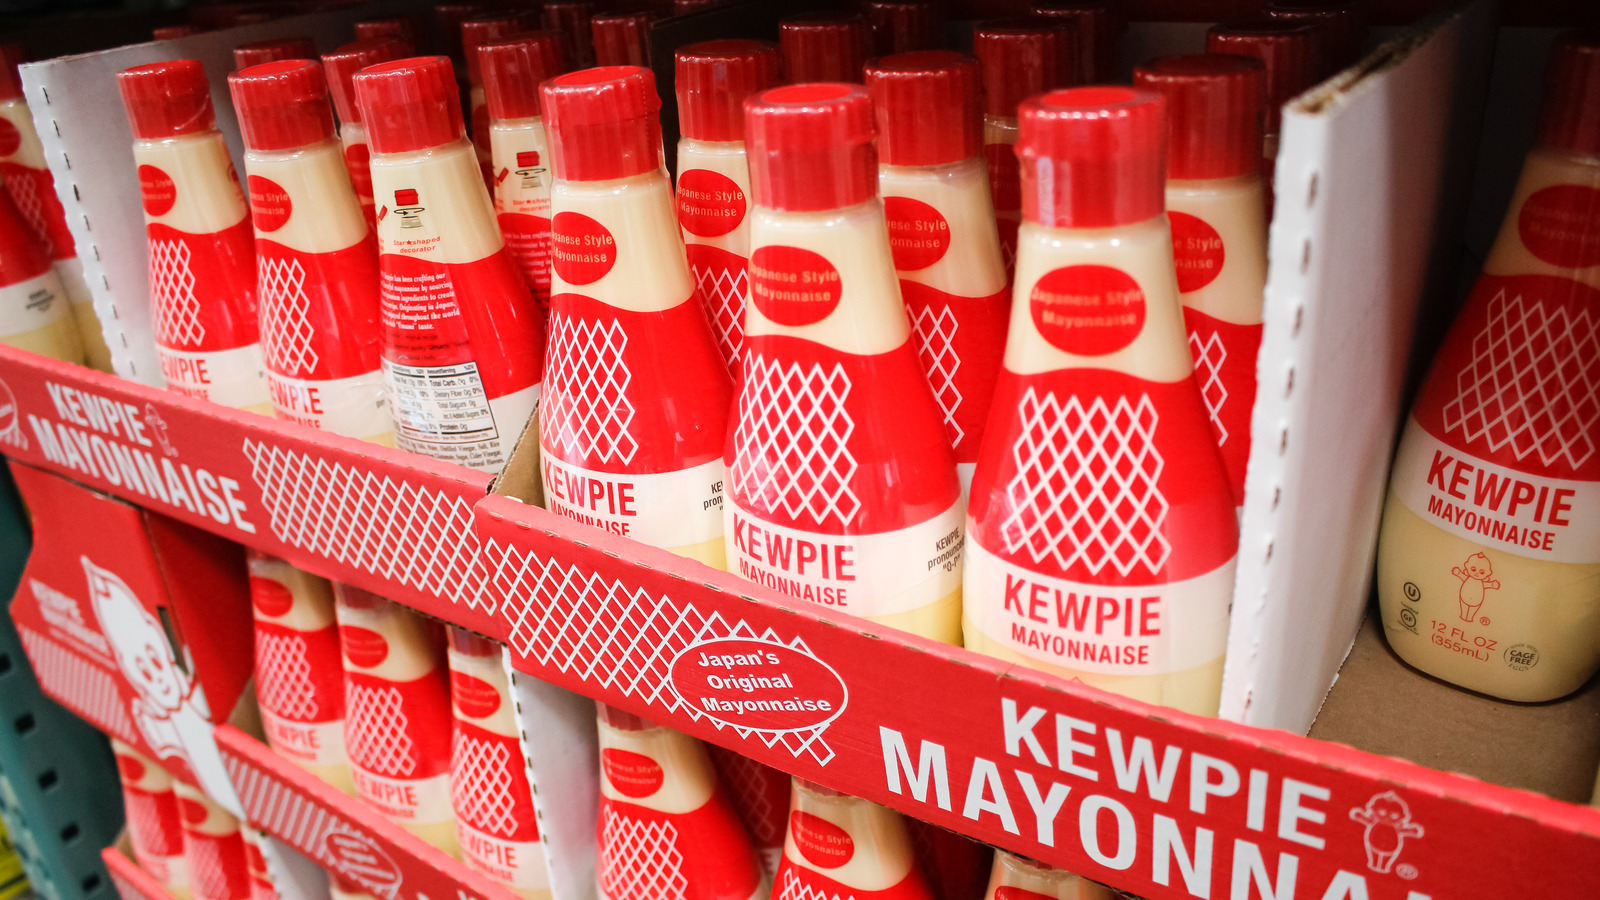 Why You Should Read The Label The Next Time You Buy Kewpie Mayo